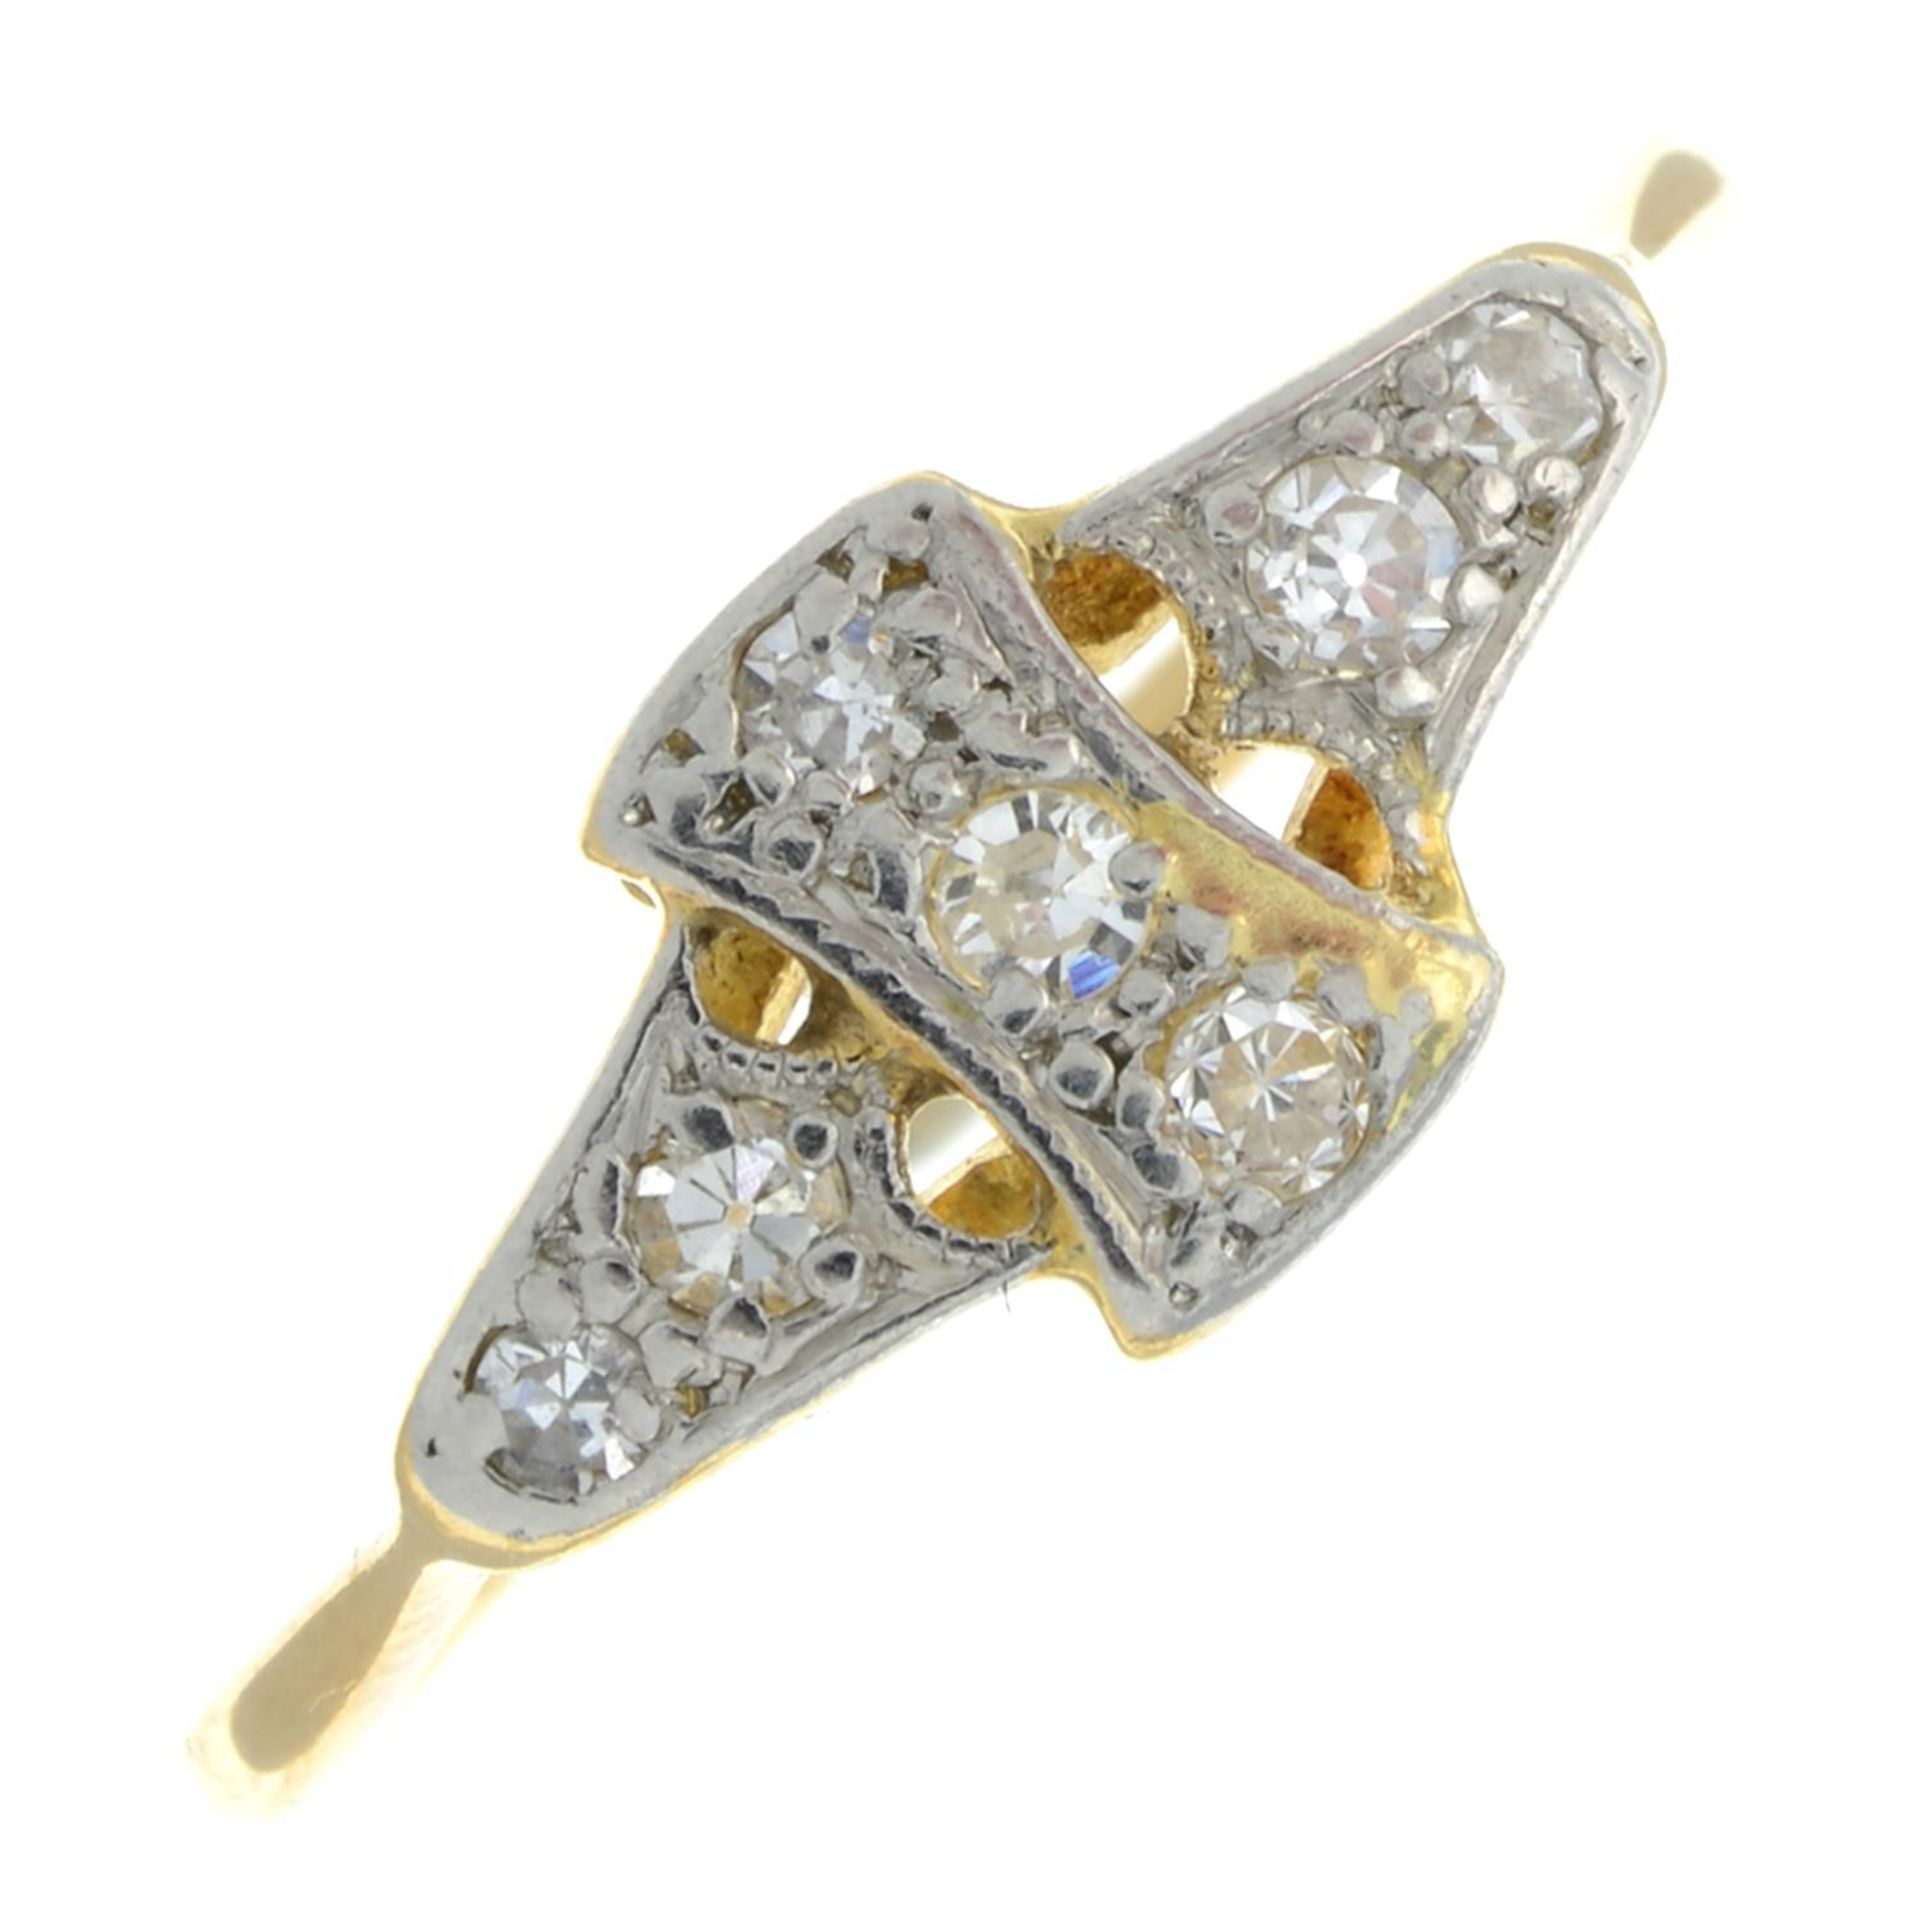 An early to mid 20th century 18ct gold and platinum single and old-cut diamond ring.